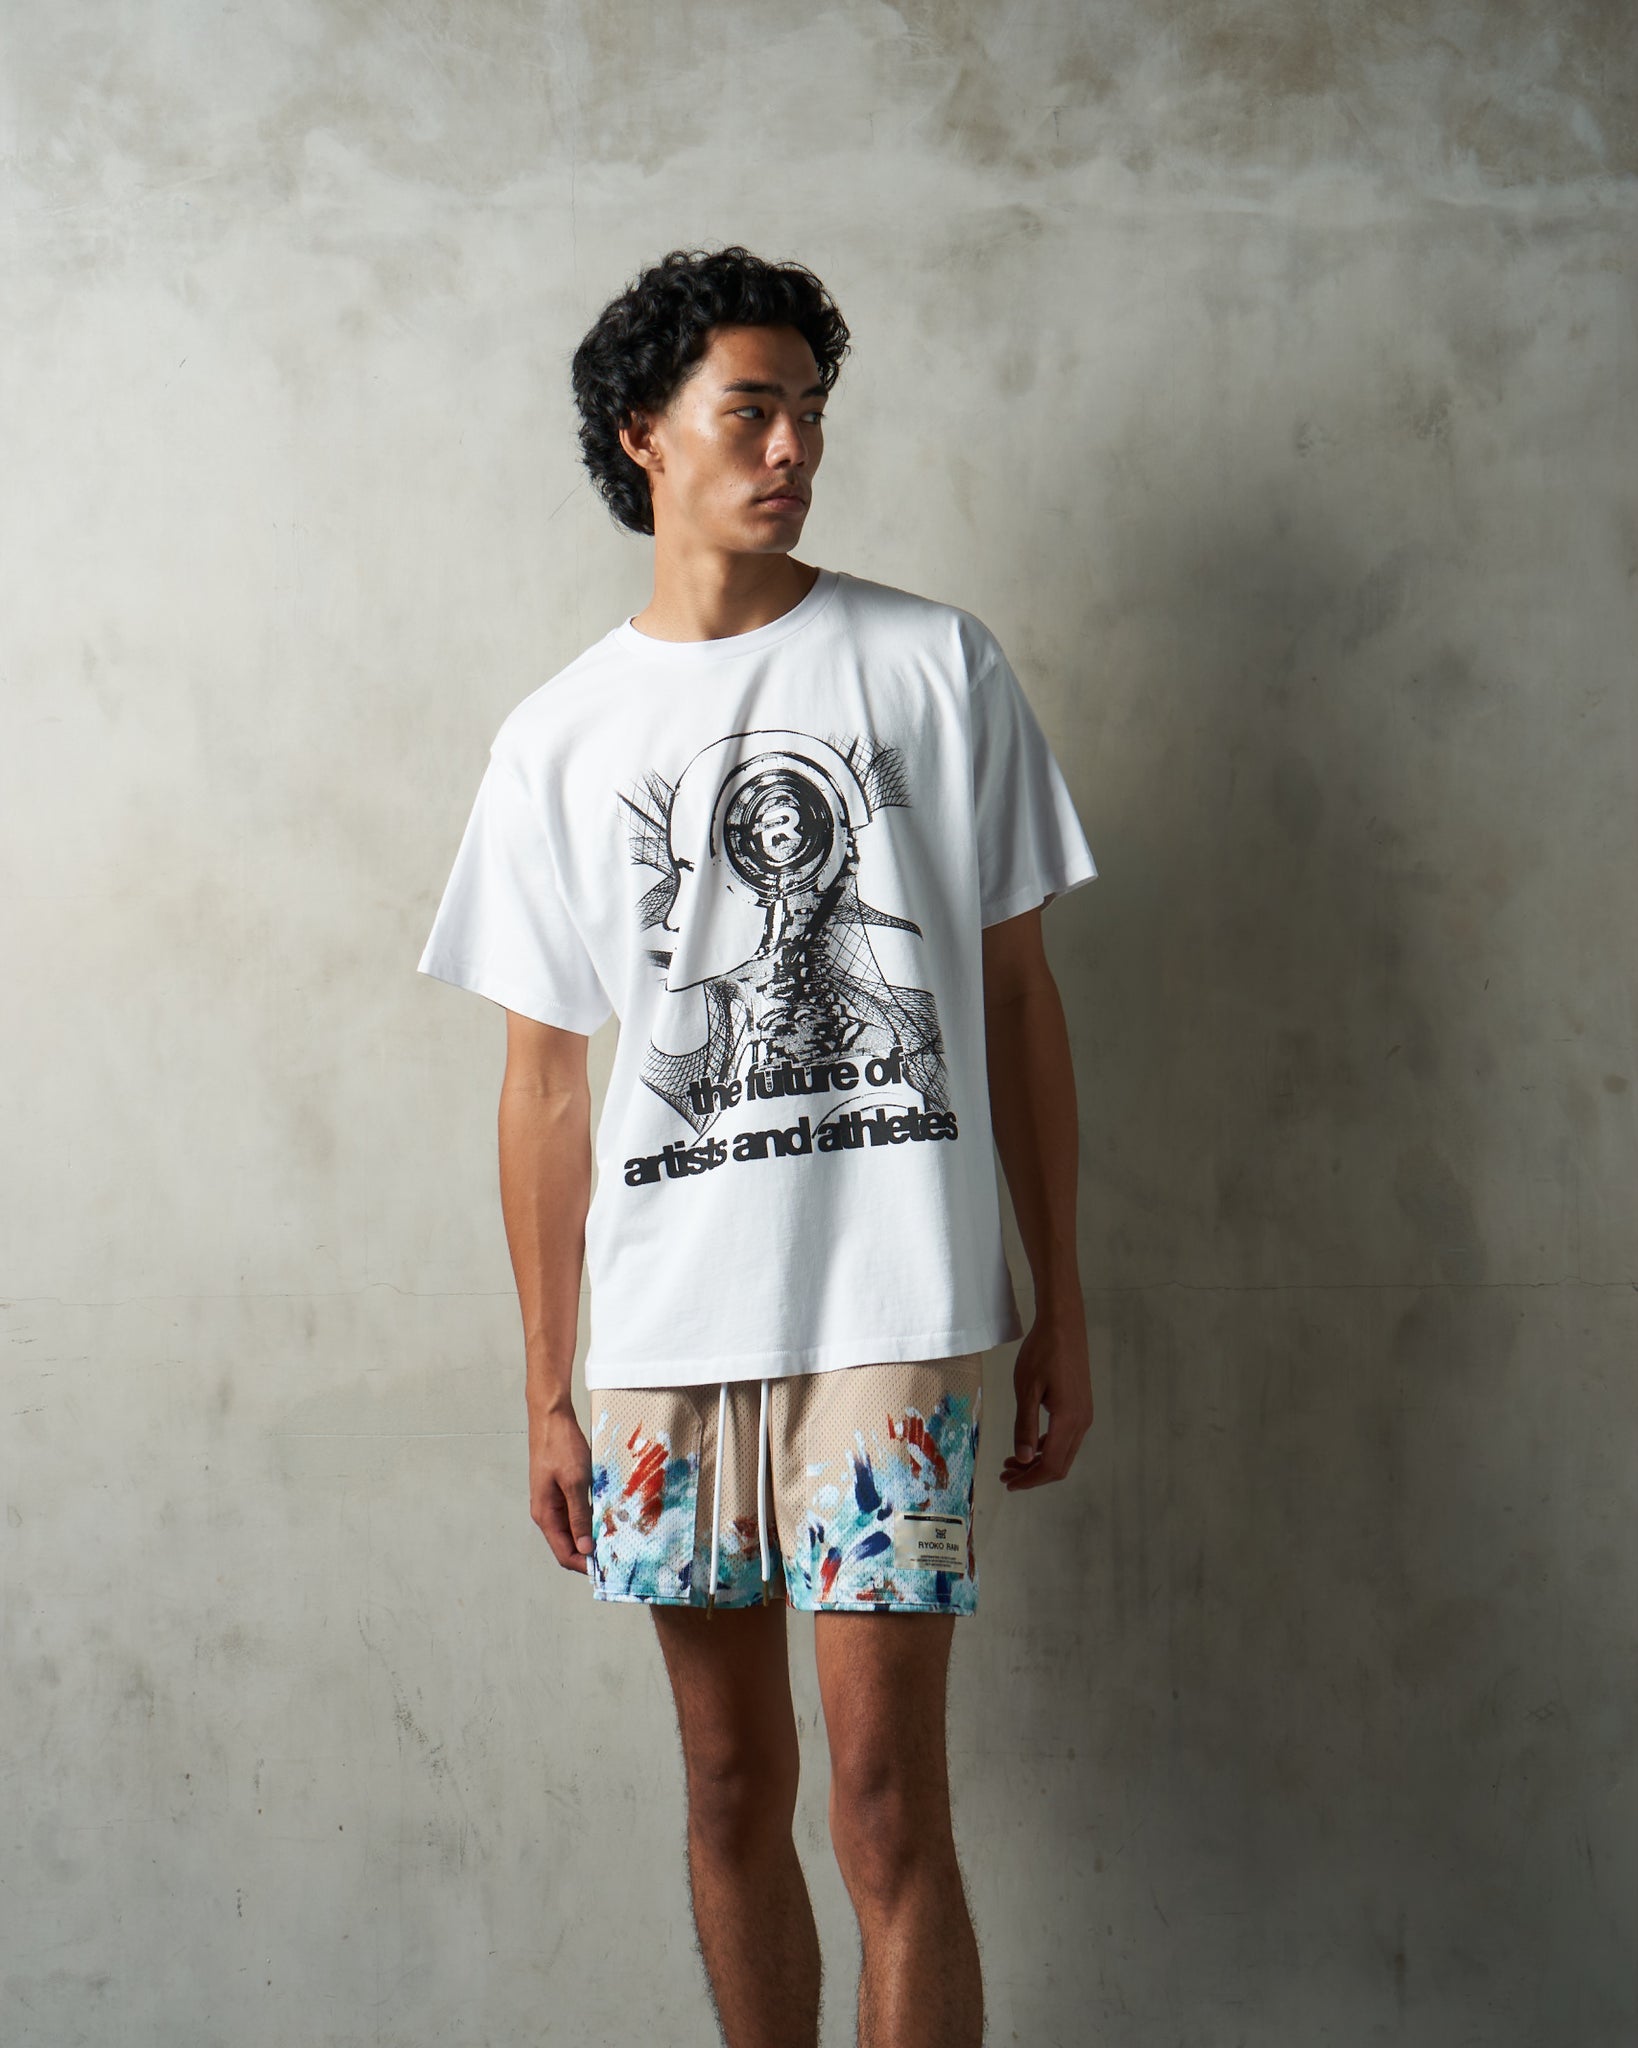 Model wearing the Ryoko Rain Artists and Athletes Collection. Model is wearing "The Future" white tee and Artist- tan shorts.